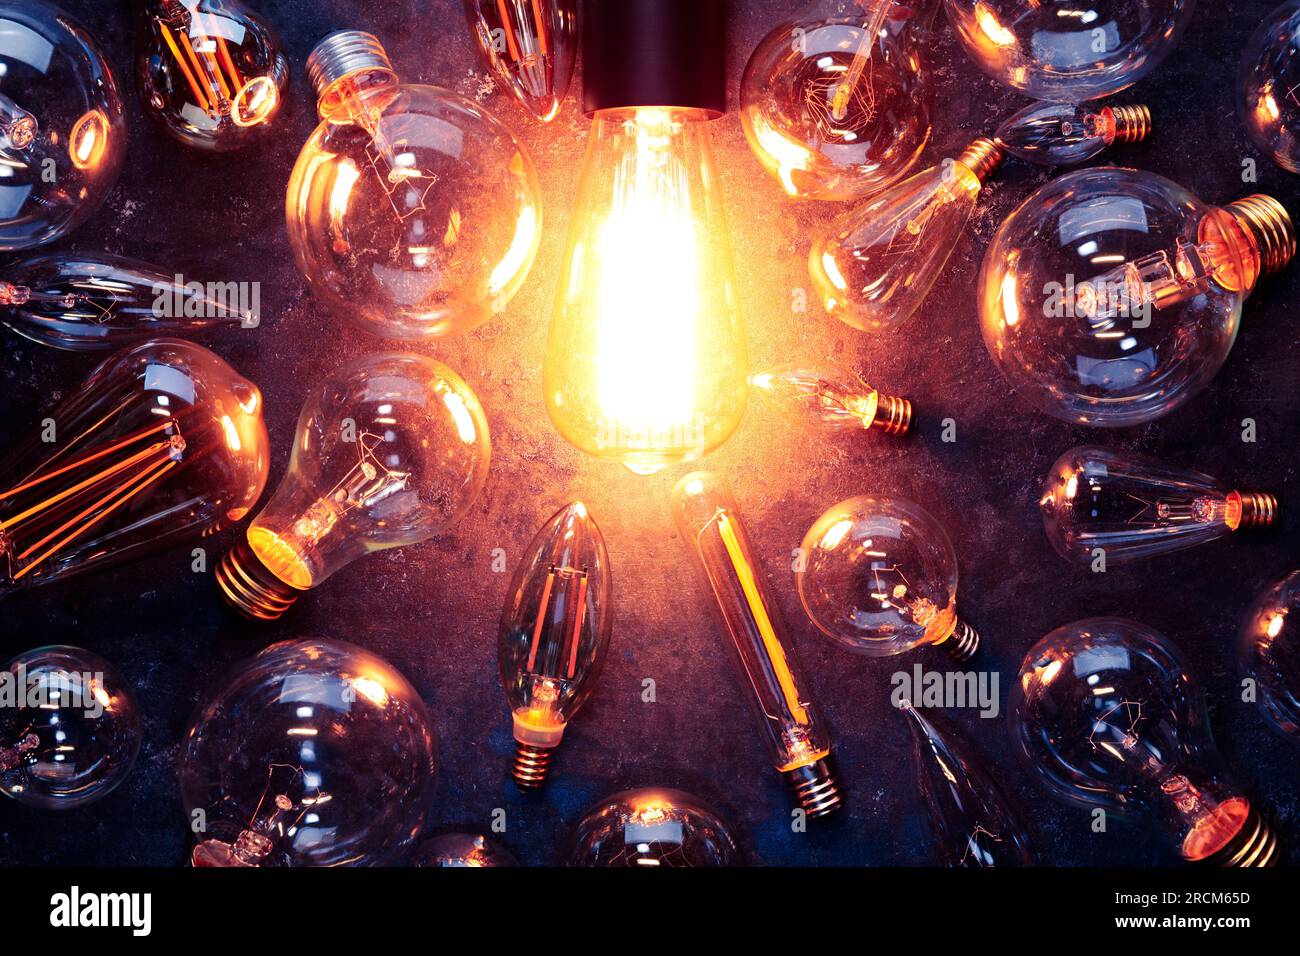 Vintage old light bulb glowing yellow on rough dark background surrounded by burnt out bulbs. Idea, creativity concept. Stock Photo